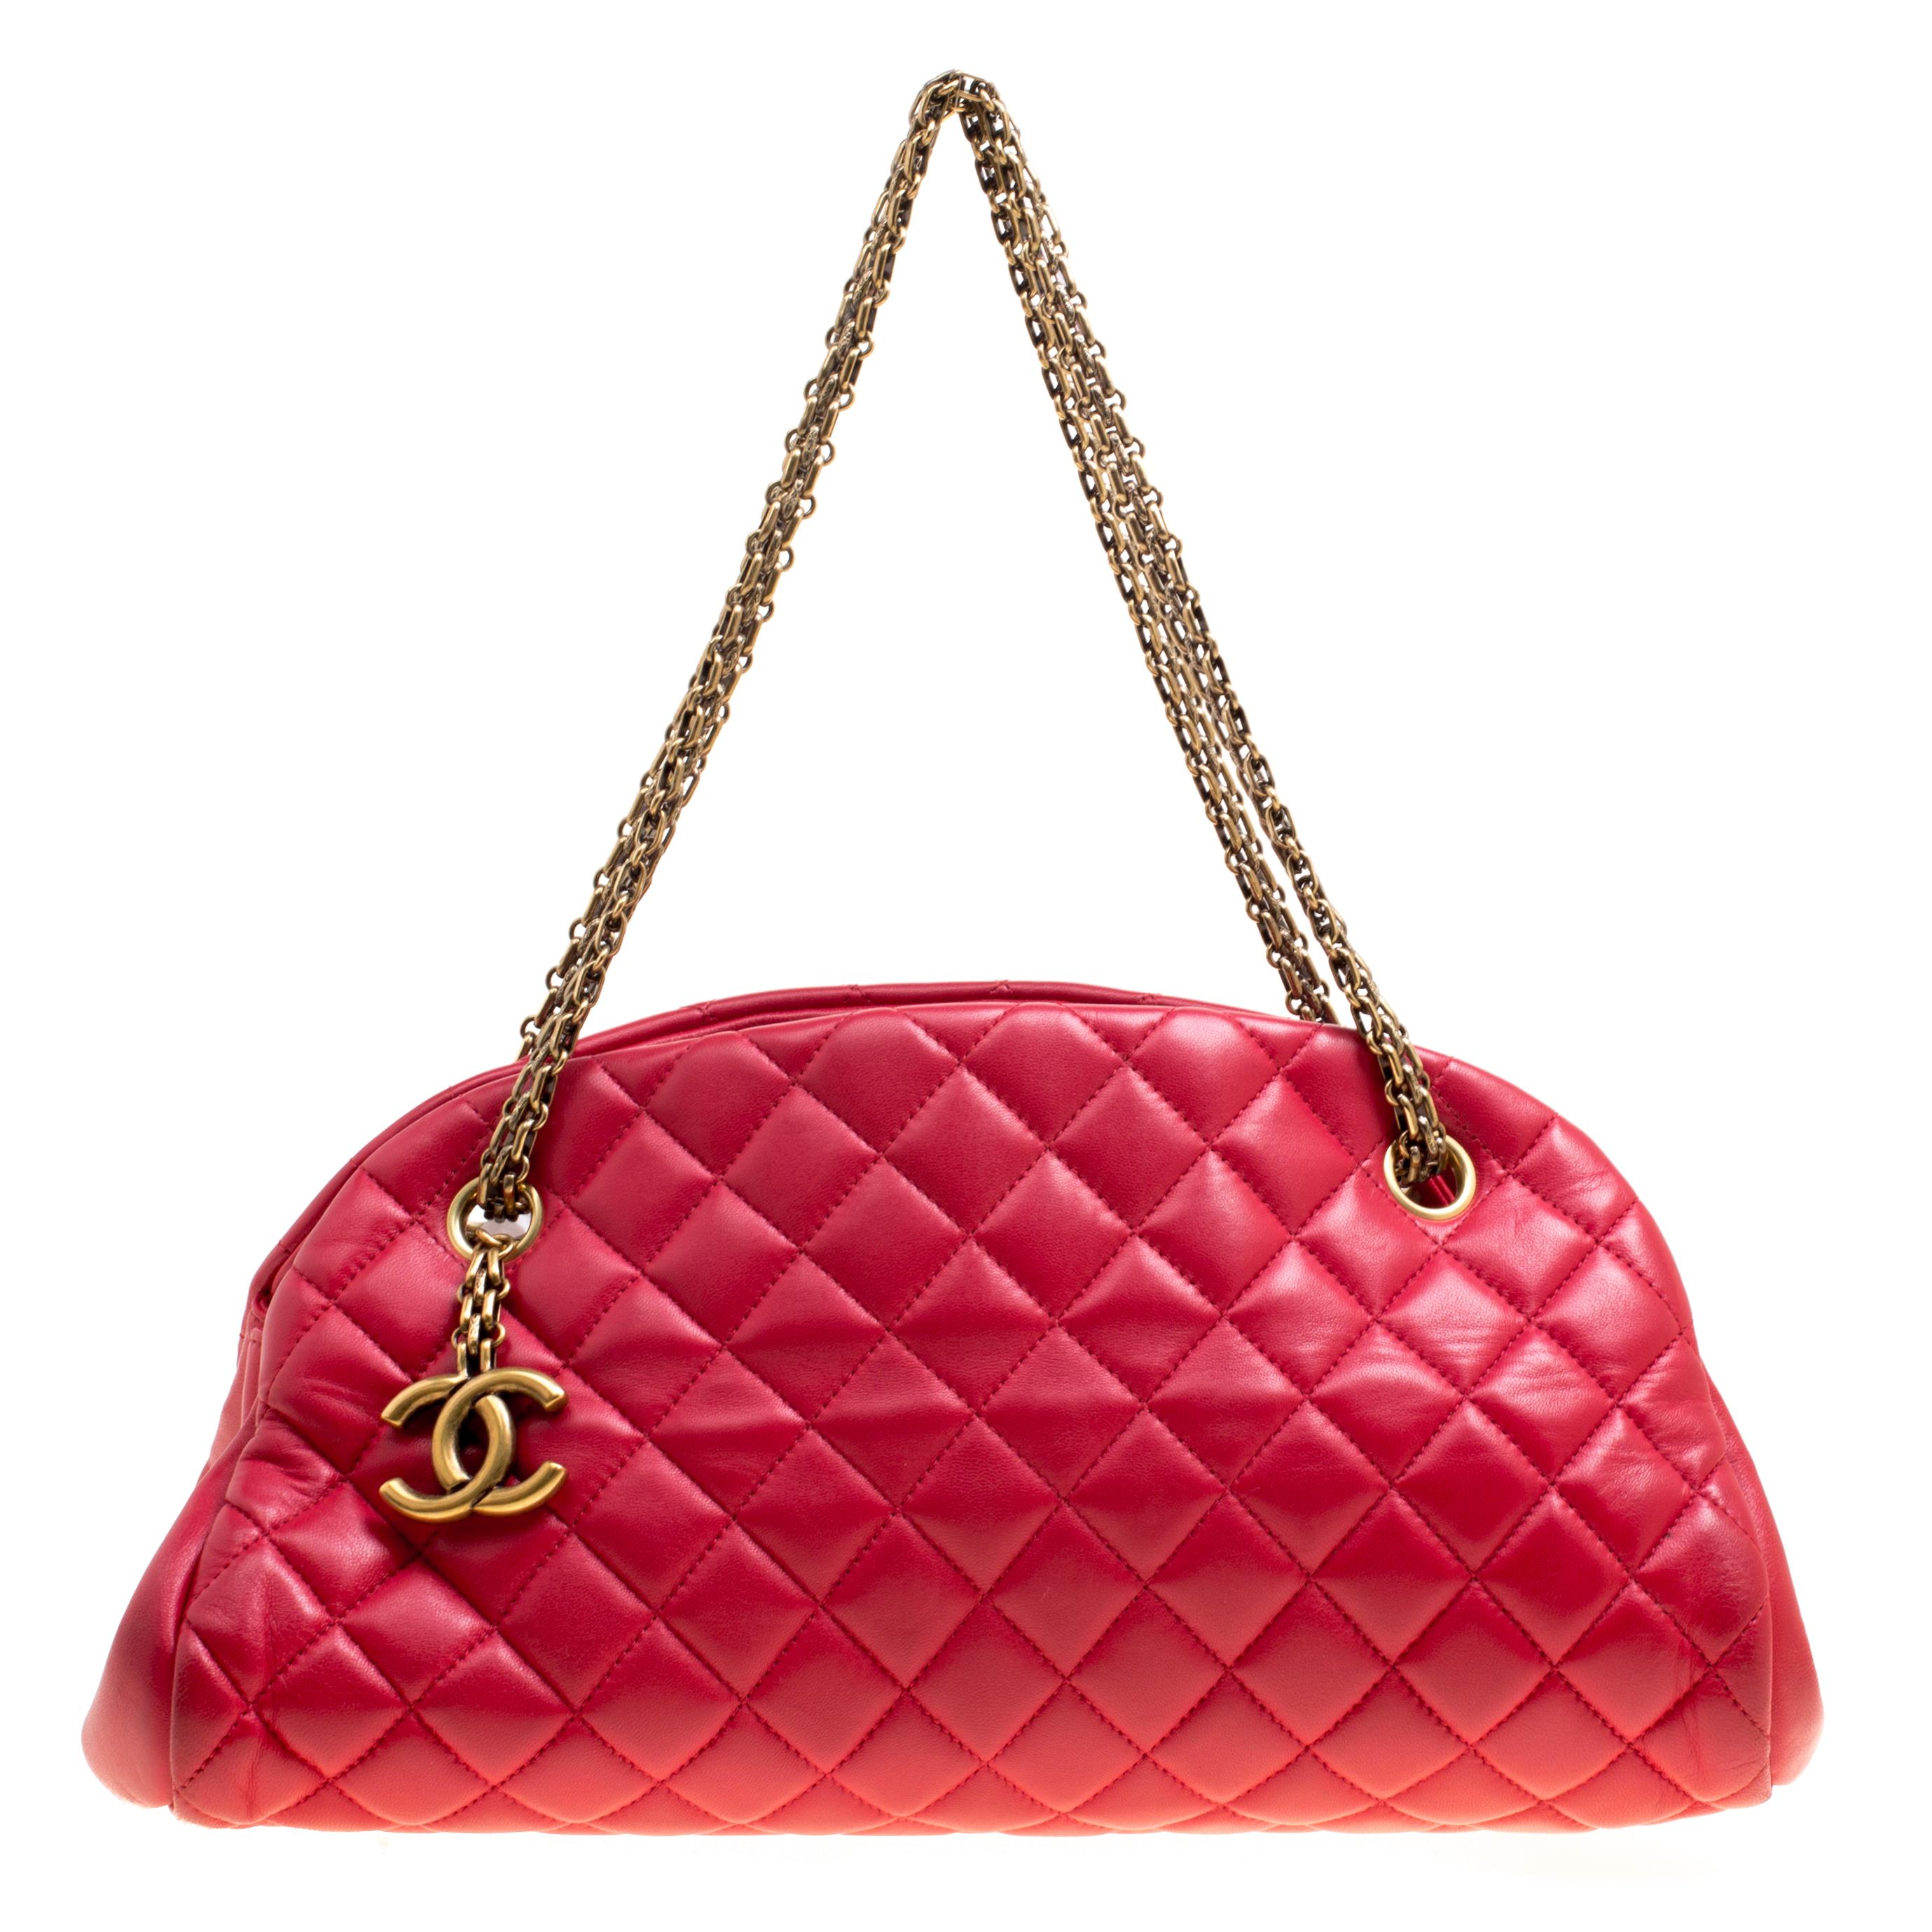 Chanel Red Quilted Leather Medium Just Mademoiselle Bowling Bag